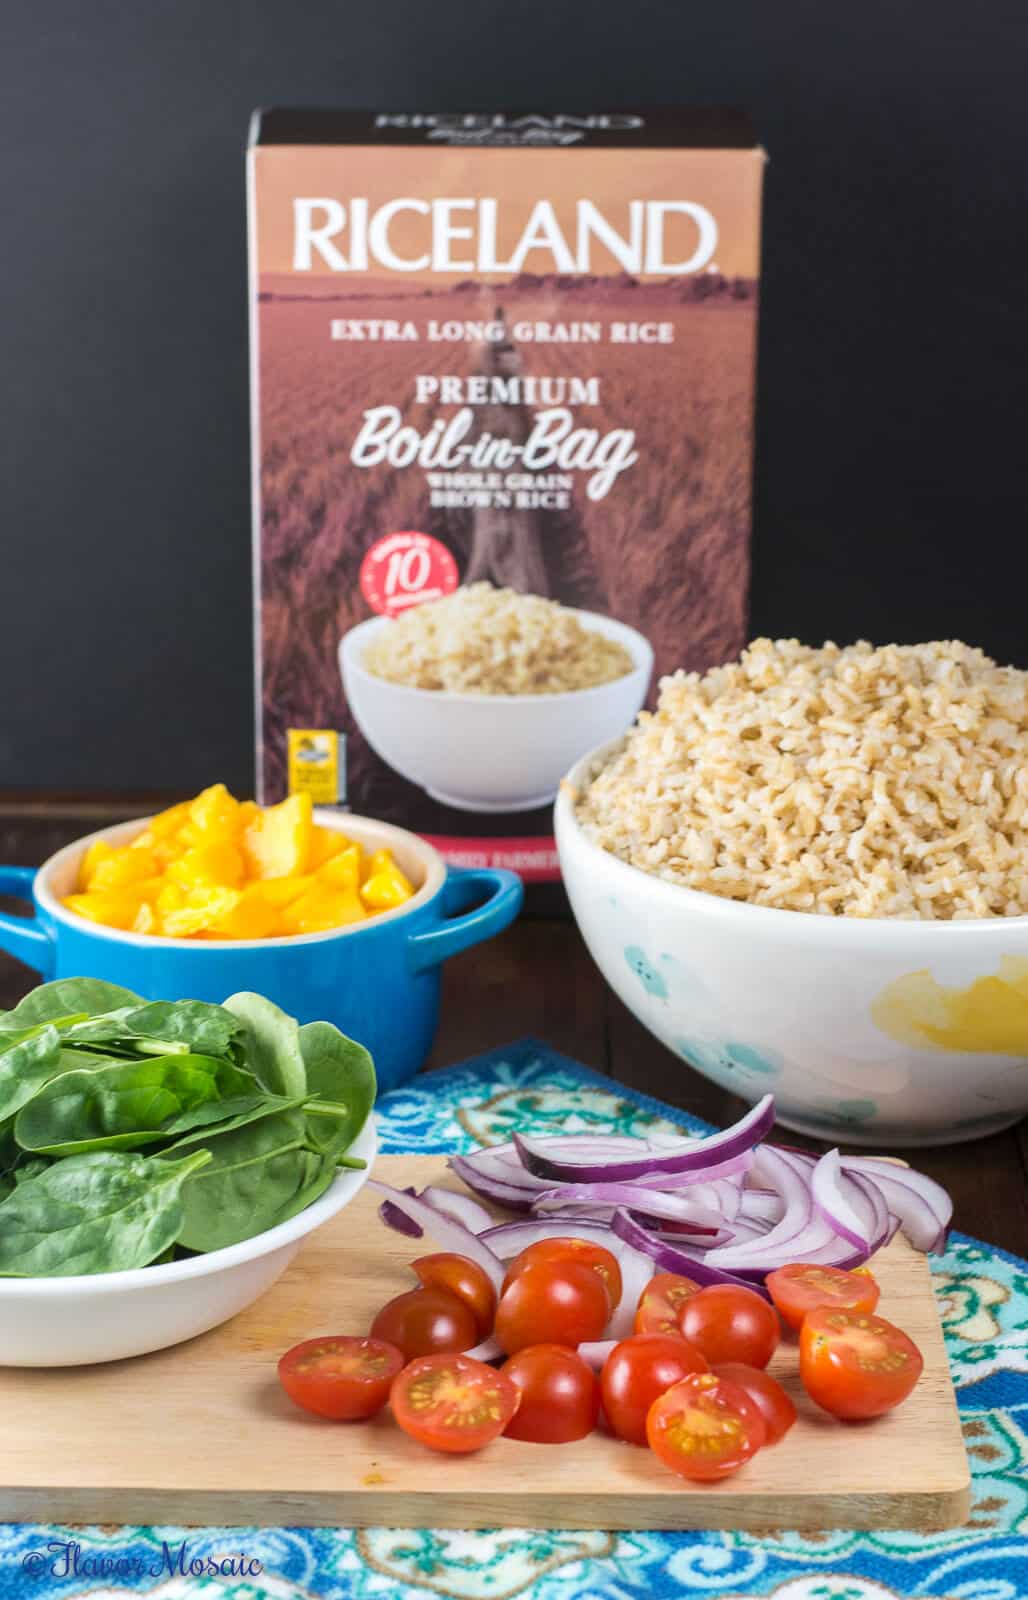 Mango Spinach Rice Salad, with brown rice, mango, baby spinach, tomatoes, and red onions in a red wine vinaigrette, makes a delicious and colorful side dish for a fish dinner, barbecue or potluck. #ProntoPerfectRice #Ad ~ https://flavormosaic.com 